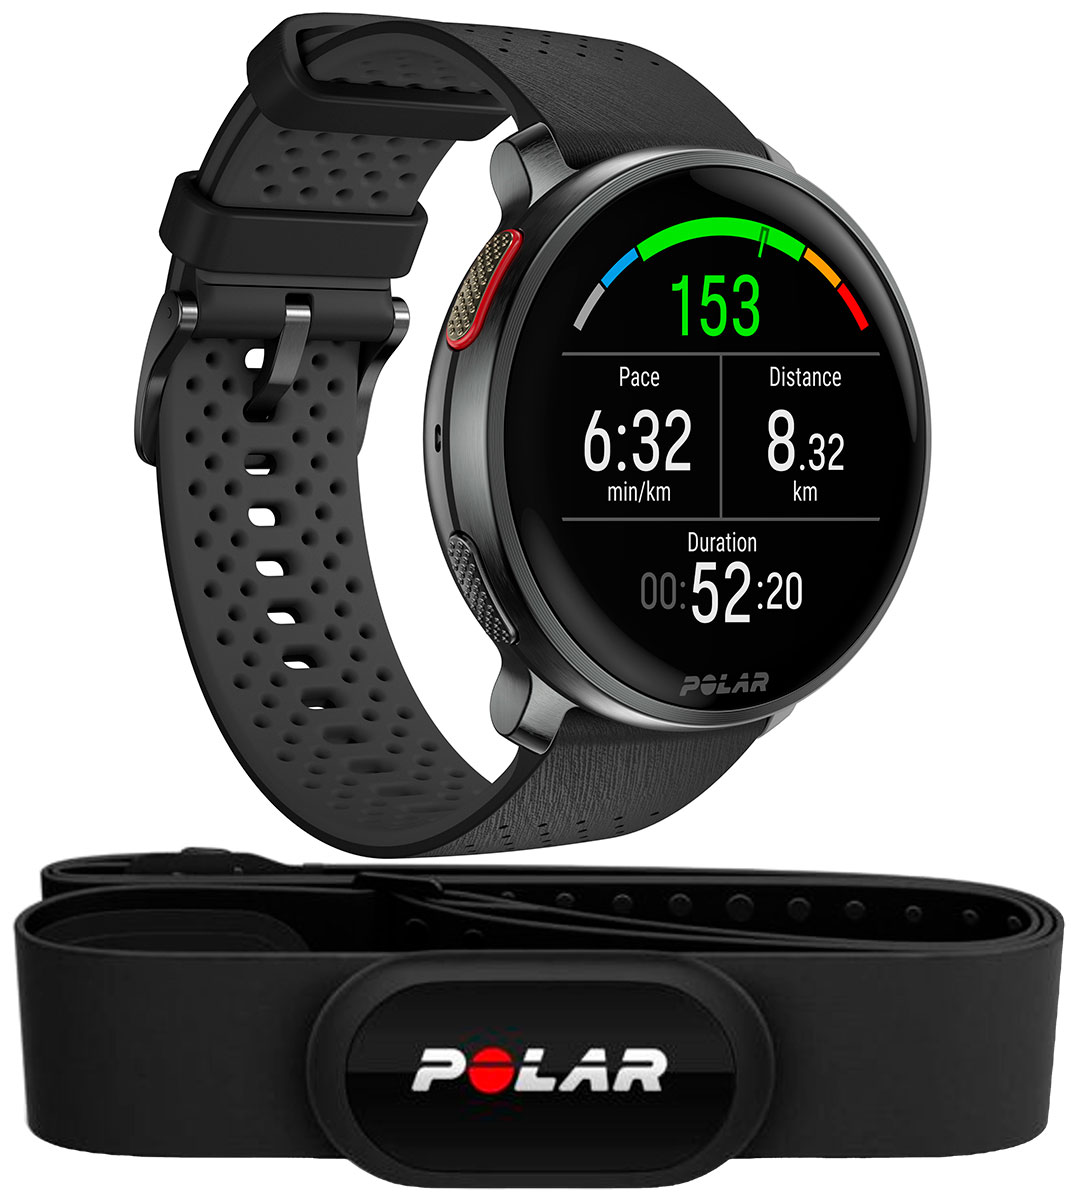 Polar Vantage V3 — 5 things that surprised me about this premium